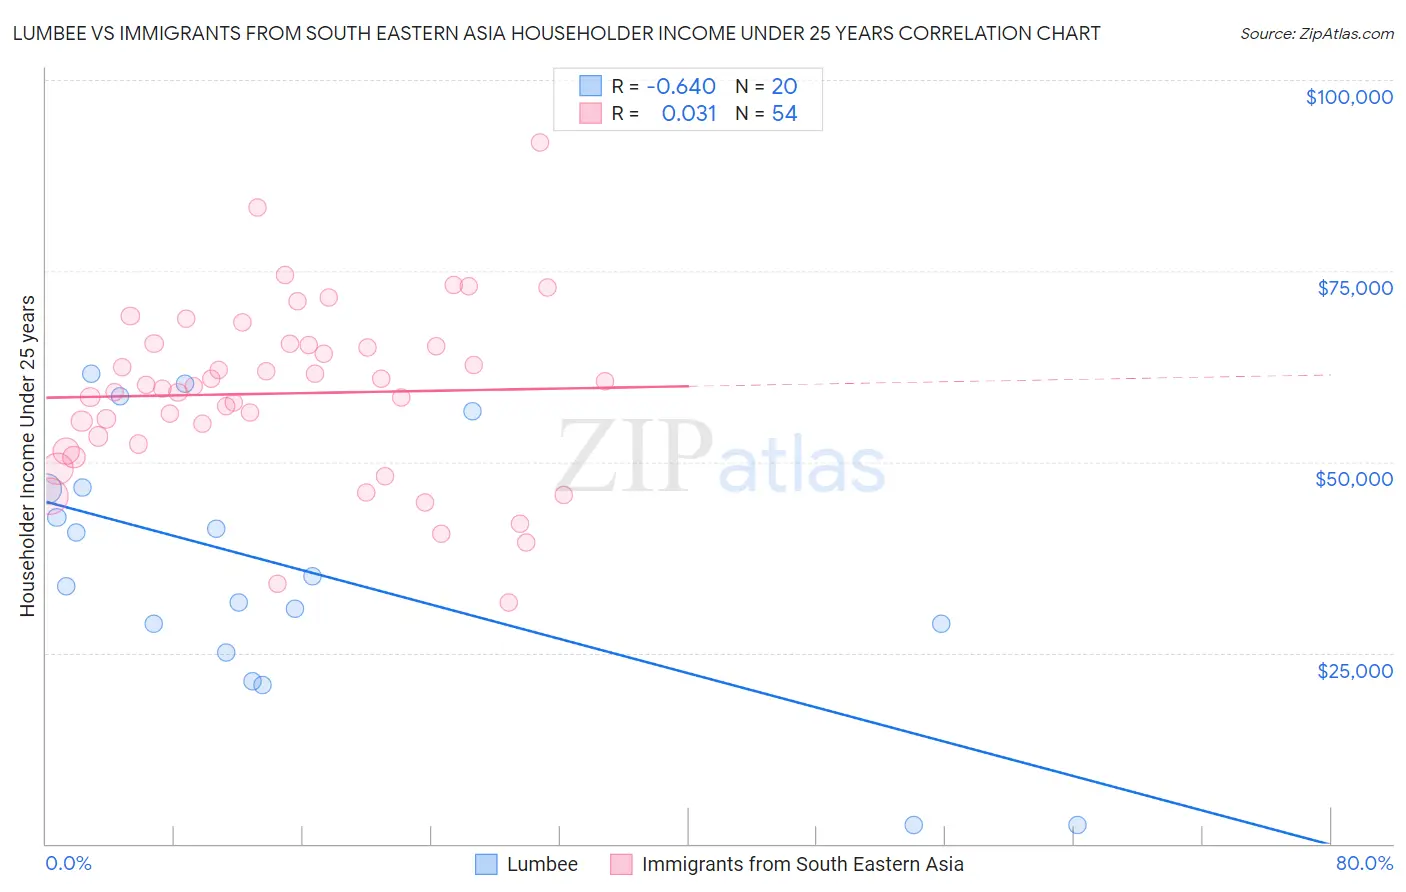 Lumbee vs Immigrants from South Eastern Asia Householder Income Under 25 years